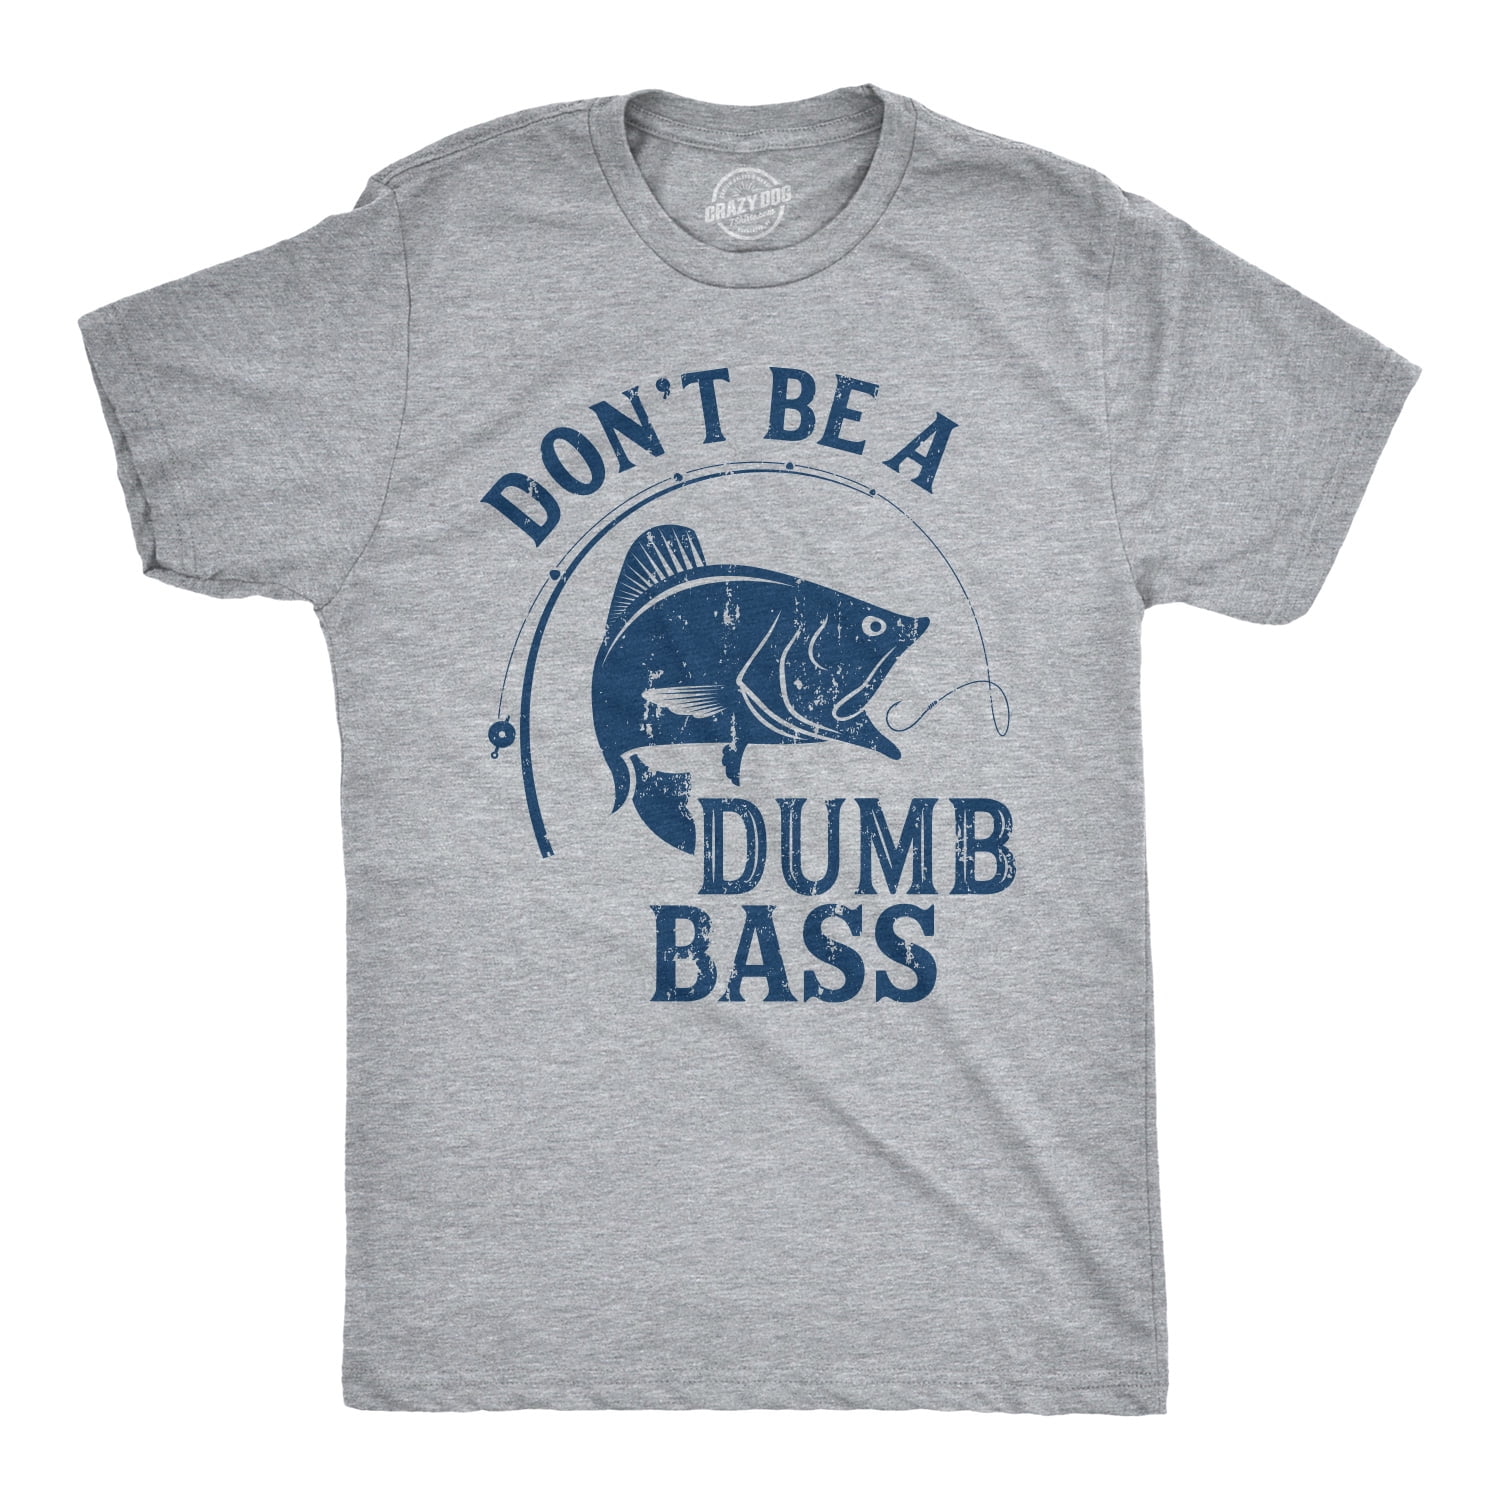 Mens Dont Be A Dumb Bass T shirt Funny Fishing Tee Gift for Fisherman  Graphic (Light Heather Grey) - XXL Graphic Tees 